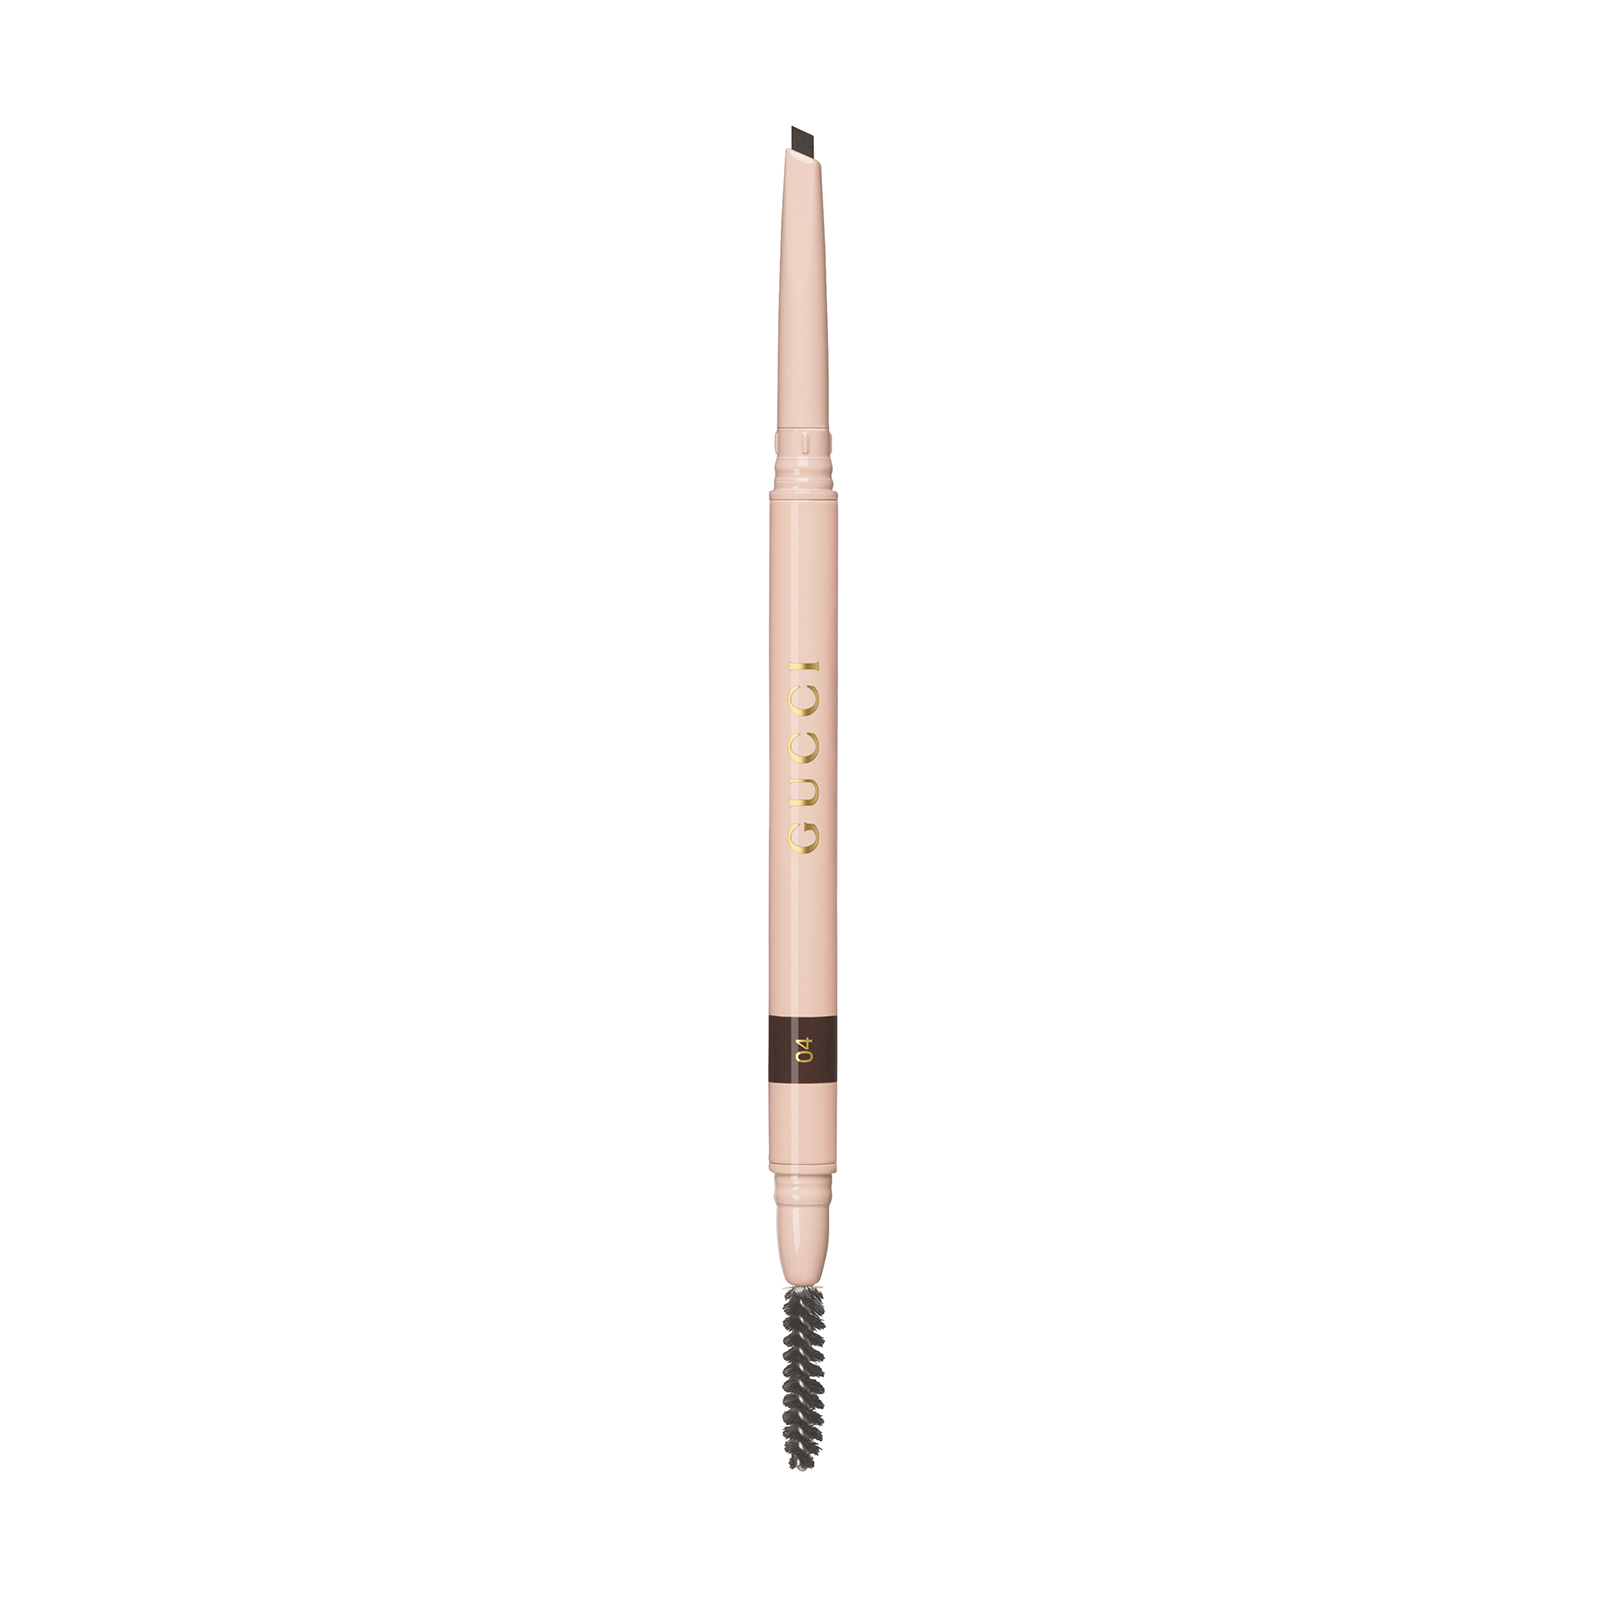 Gucci Stylo A Sourcils Waterproof Eyebrow Pencil 0.09G 4 Brown